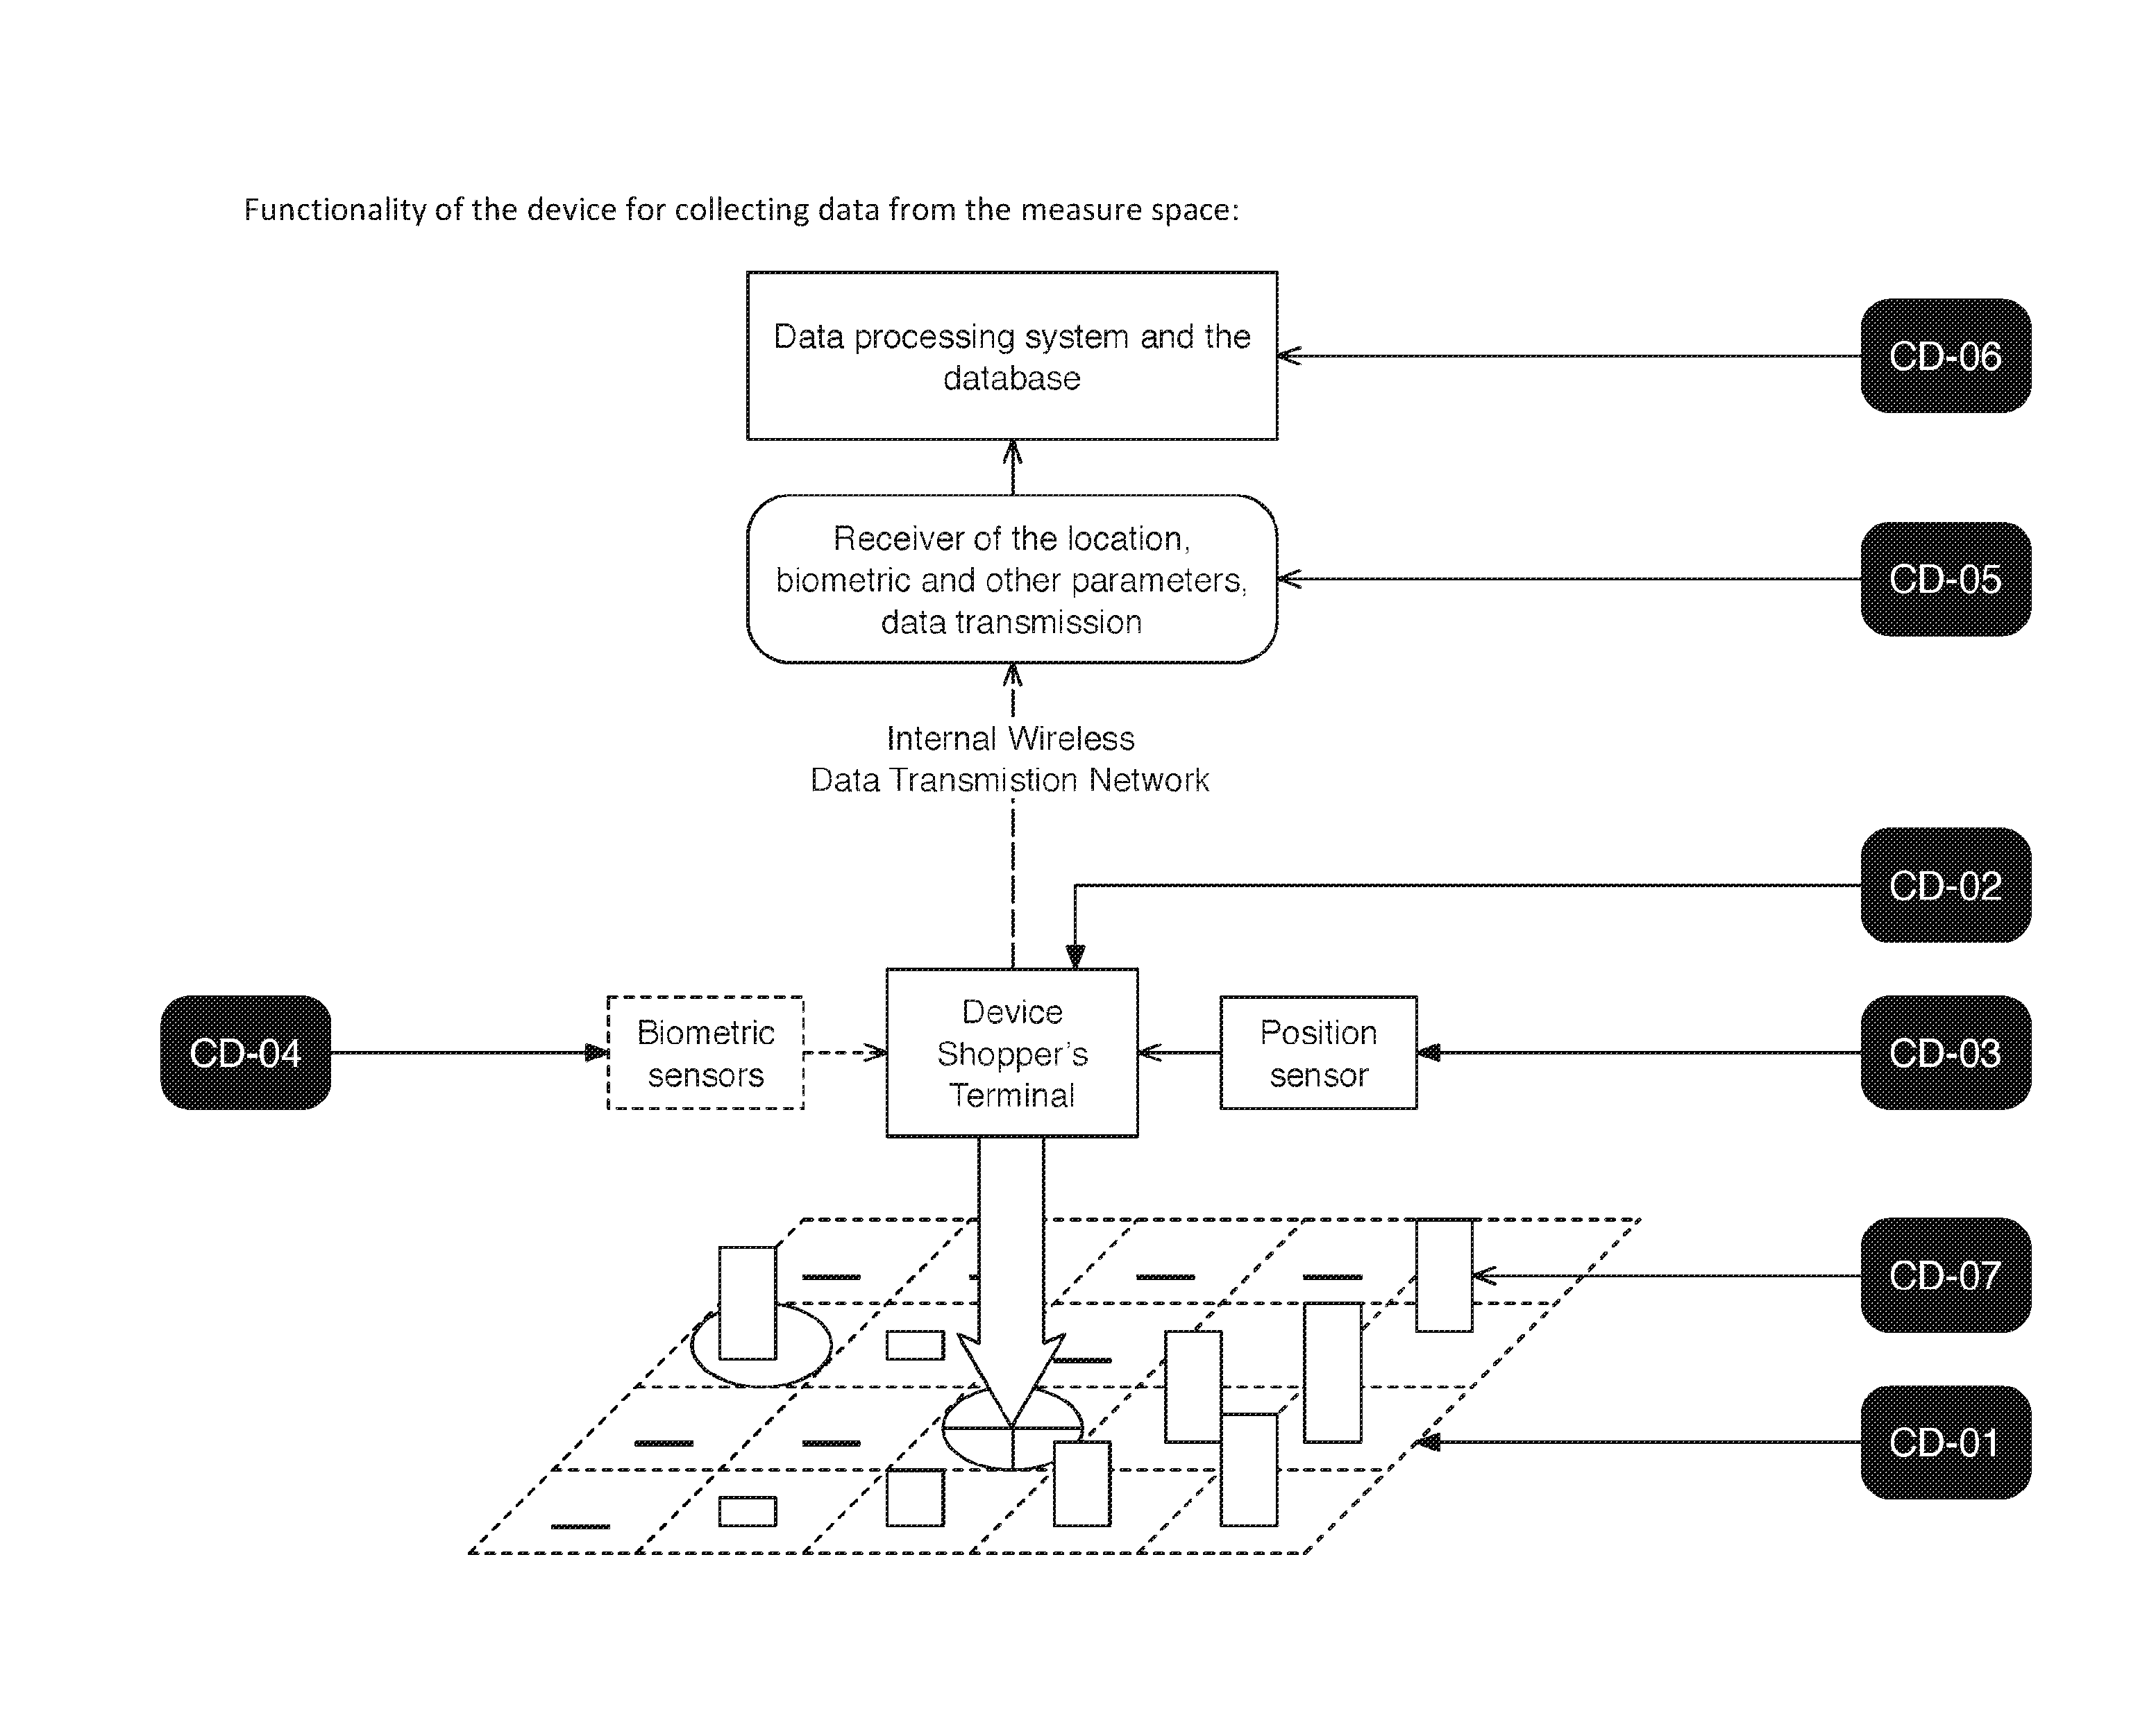 Method To Generate A Consumer Interest Spatial Map, Based On Data Collected From The Movements Of Multiple Devices In A Defined Location